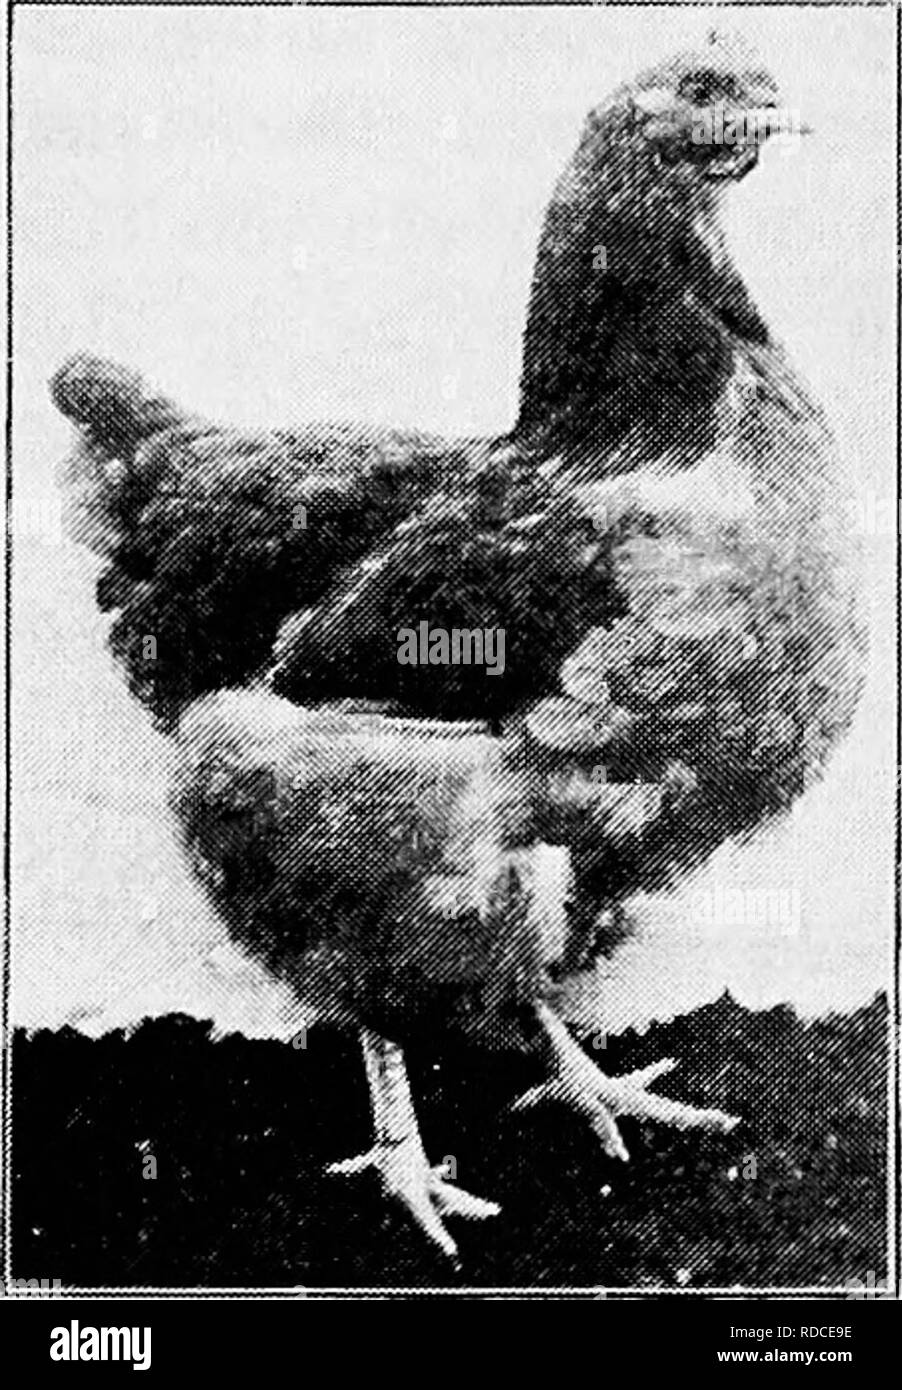 . Principles and practice of poultry culture . Poultry. TYPES, BREEDS, AND VARIETIES OF FOWLS 419. Fig. 434. Single-Combed Buff Orpington pullet' is the result of the blending of all these stocks. This variety was intro- duced to the public in 1894. To-day it is rated the most popular of English varieties in the colonies, as well as in the mother country. White Orpingtons (single- and rose- comb). This variety was said by the originator to have resulted from crosses of White Leghorn, Black Hamburg, Single-Comb White Dorking, and Cuckoo Dorking. It was brought out in 1889. The appearance of the Stock Photo